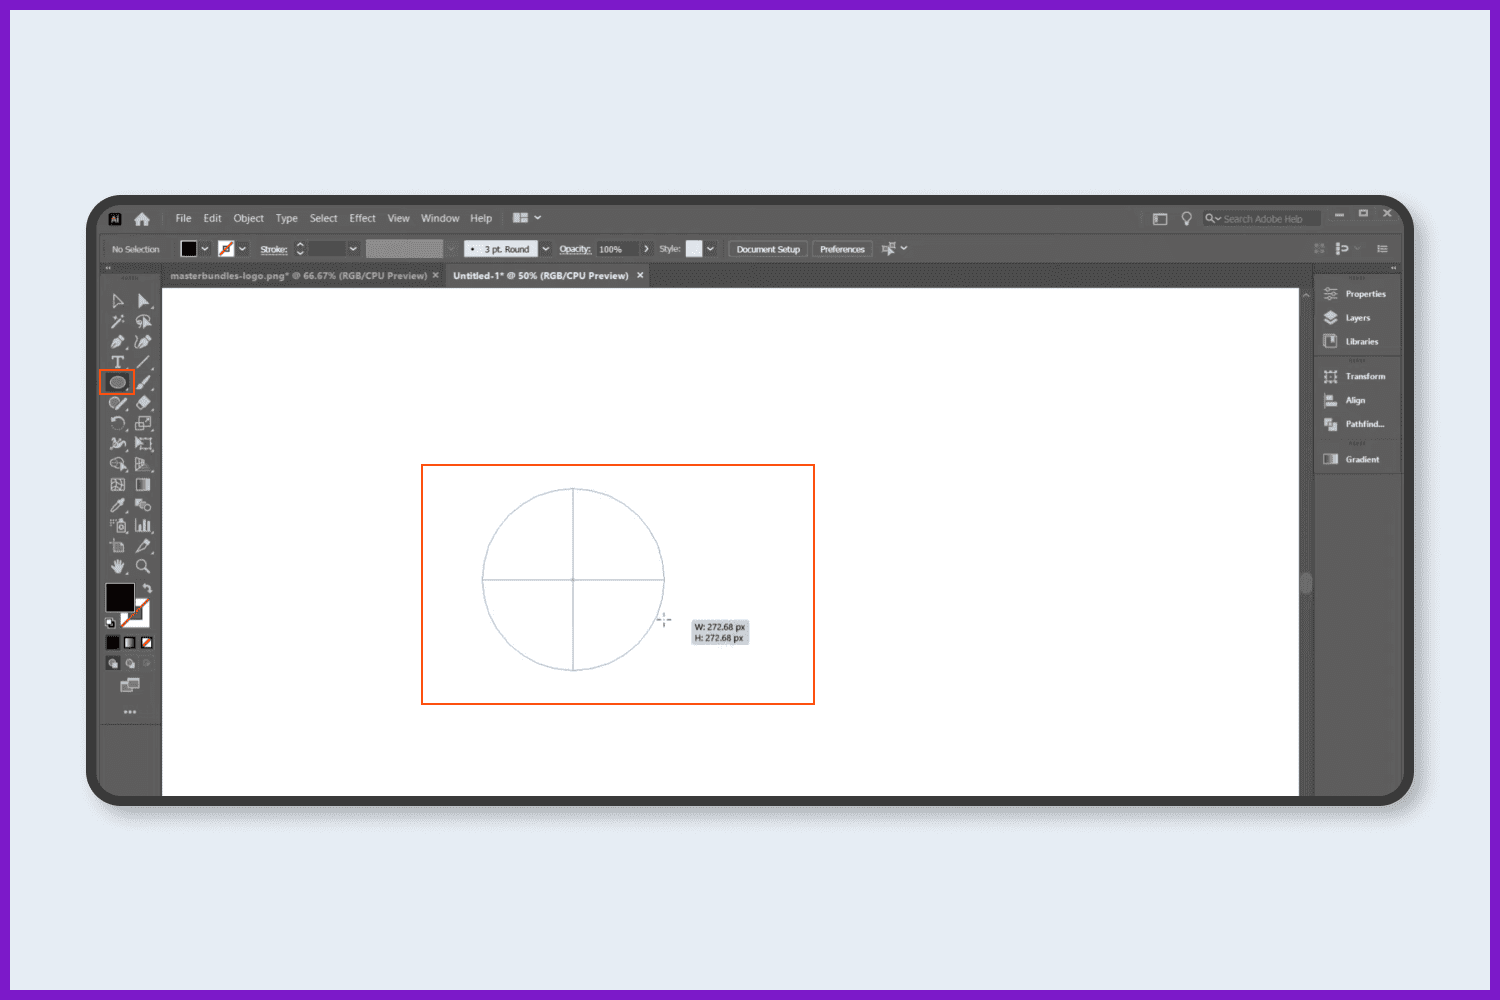 Take the Ellipse tool and draw a circle.